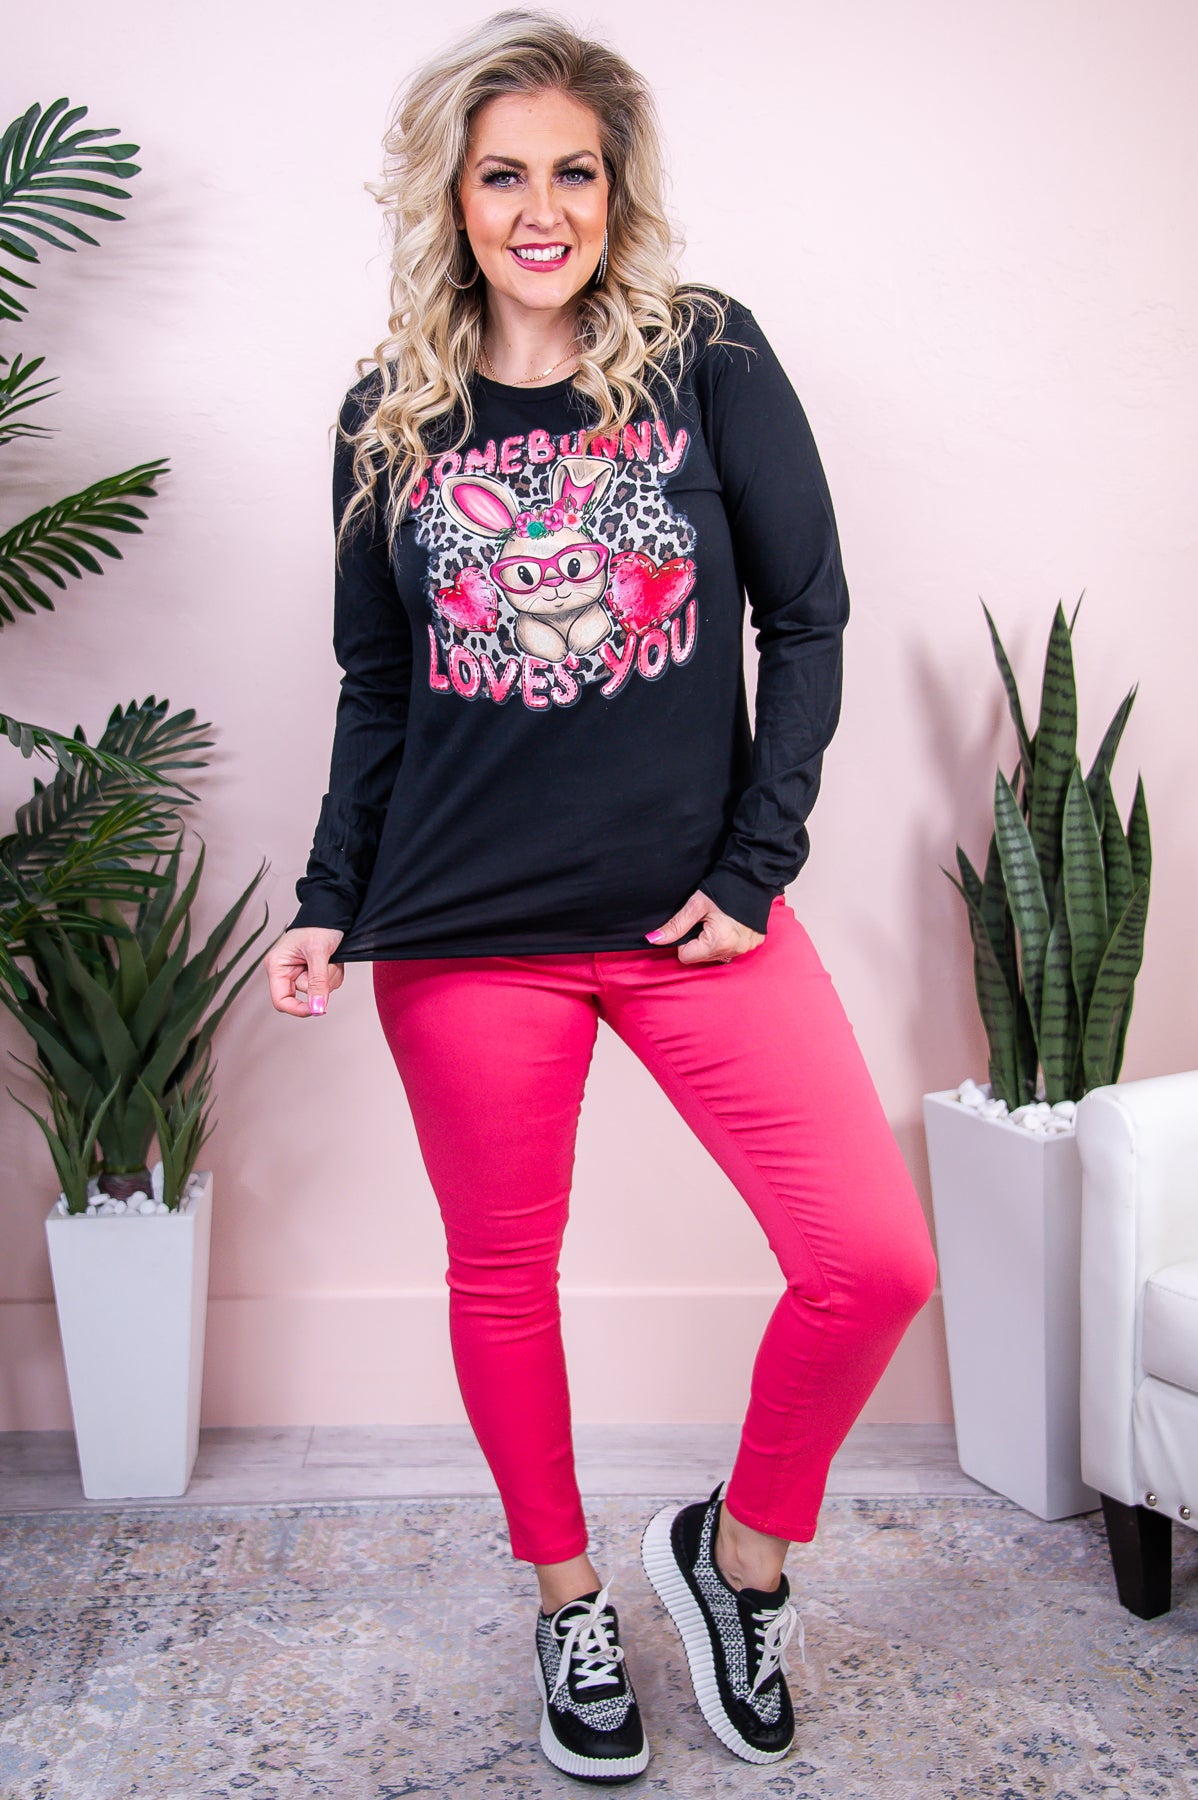 Some-Bunny Loves You Black Long Sleeve Graphic Tee - A3224BK